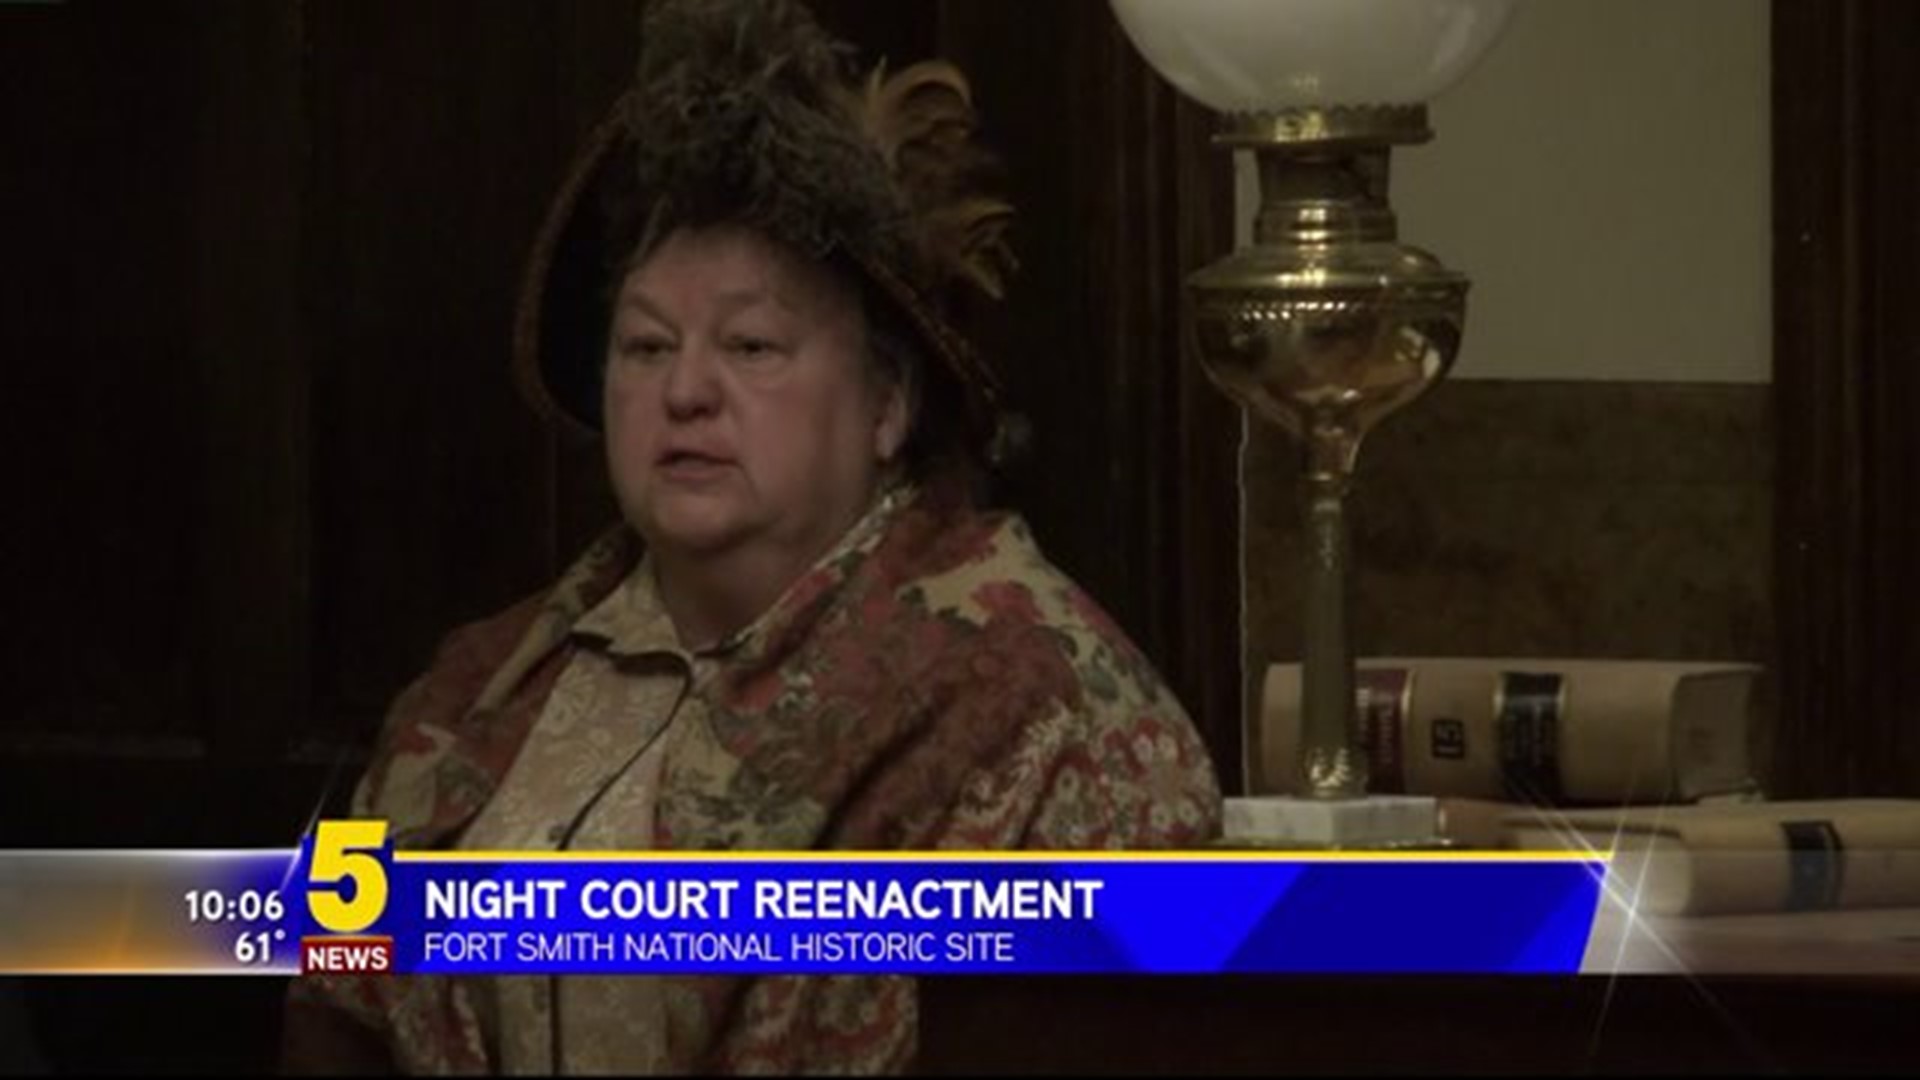 Fort Smith National Historic Site Night Court Reenactment